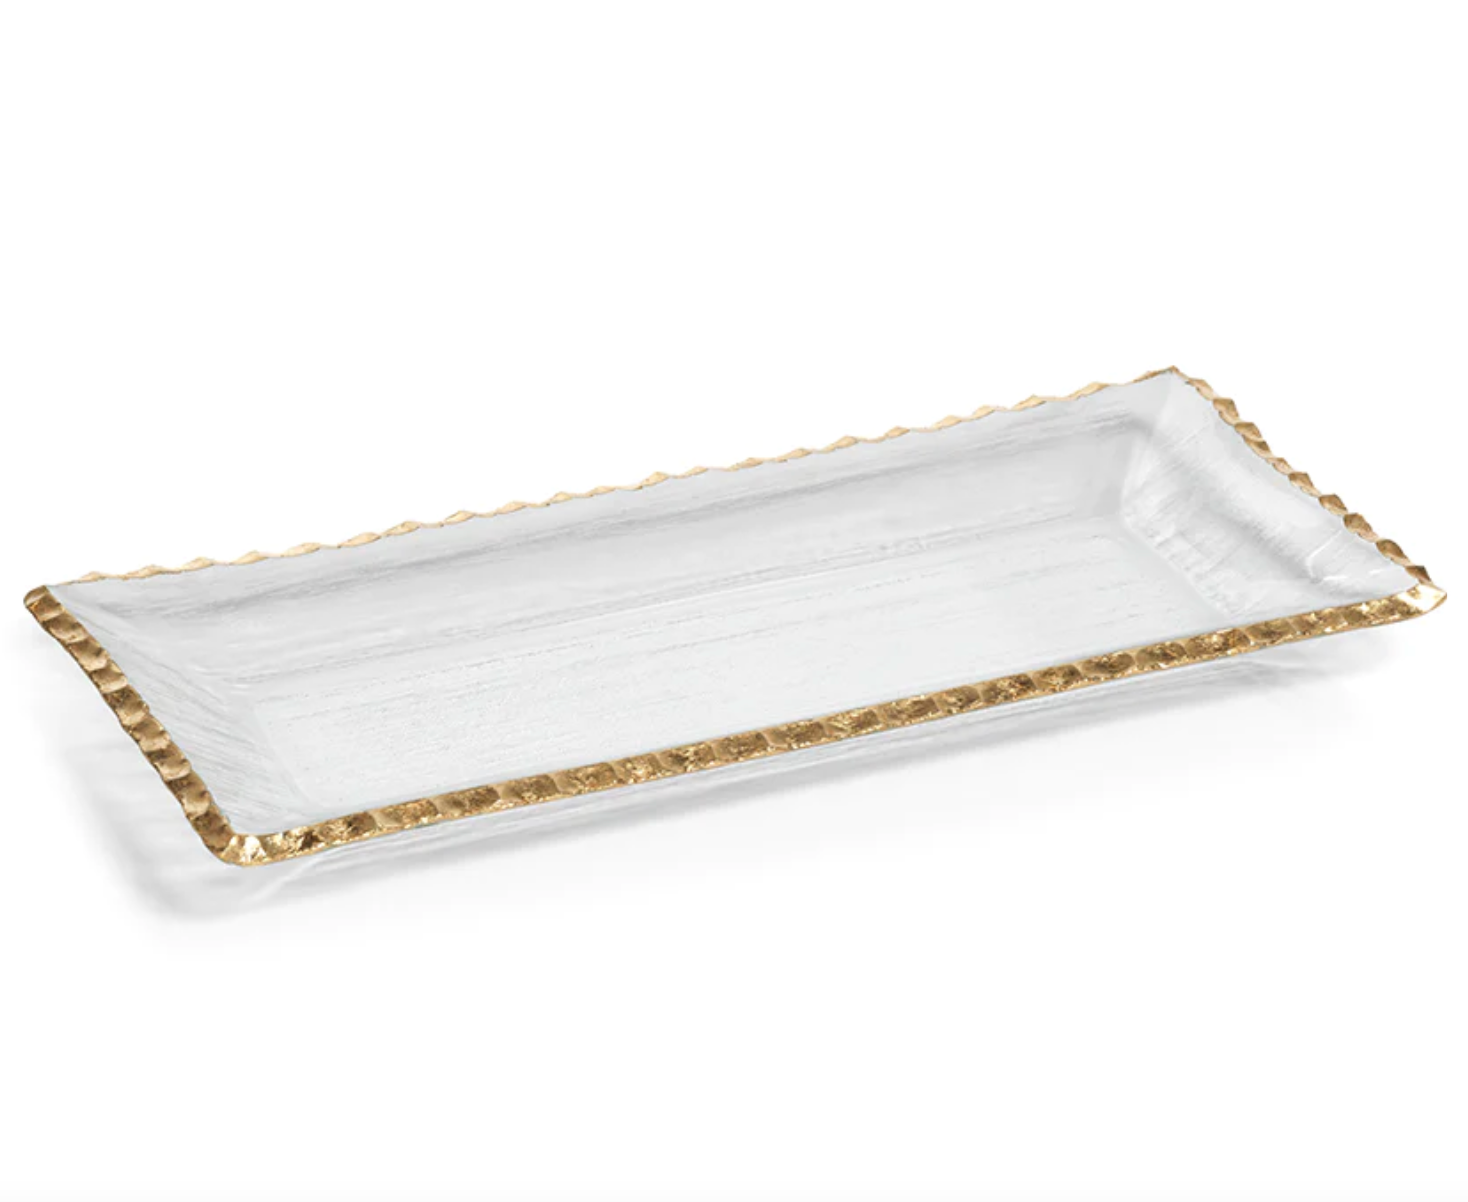 Tray, Clear Textured with Gold Trim - Medium - Danshire Market and Design 